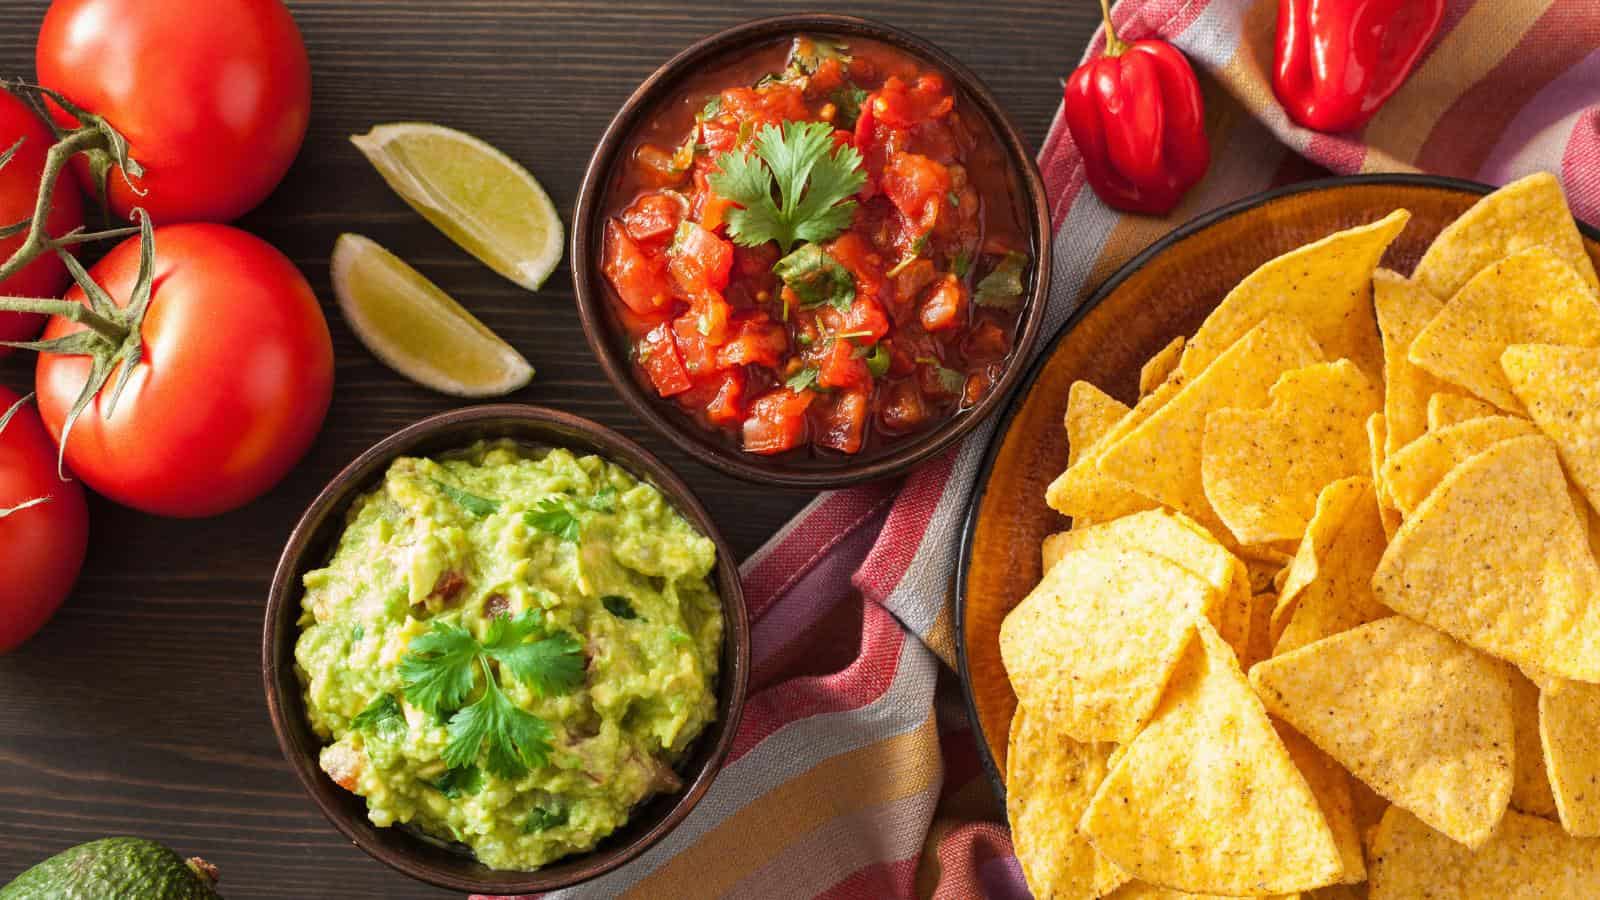 Two bowls of guacamole on tray with chips and various ingredients.